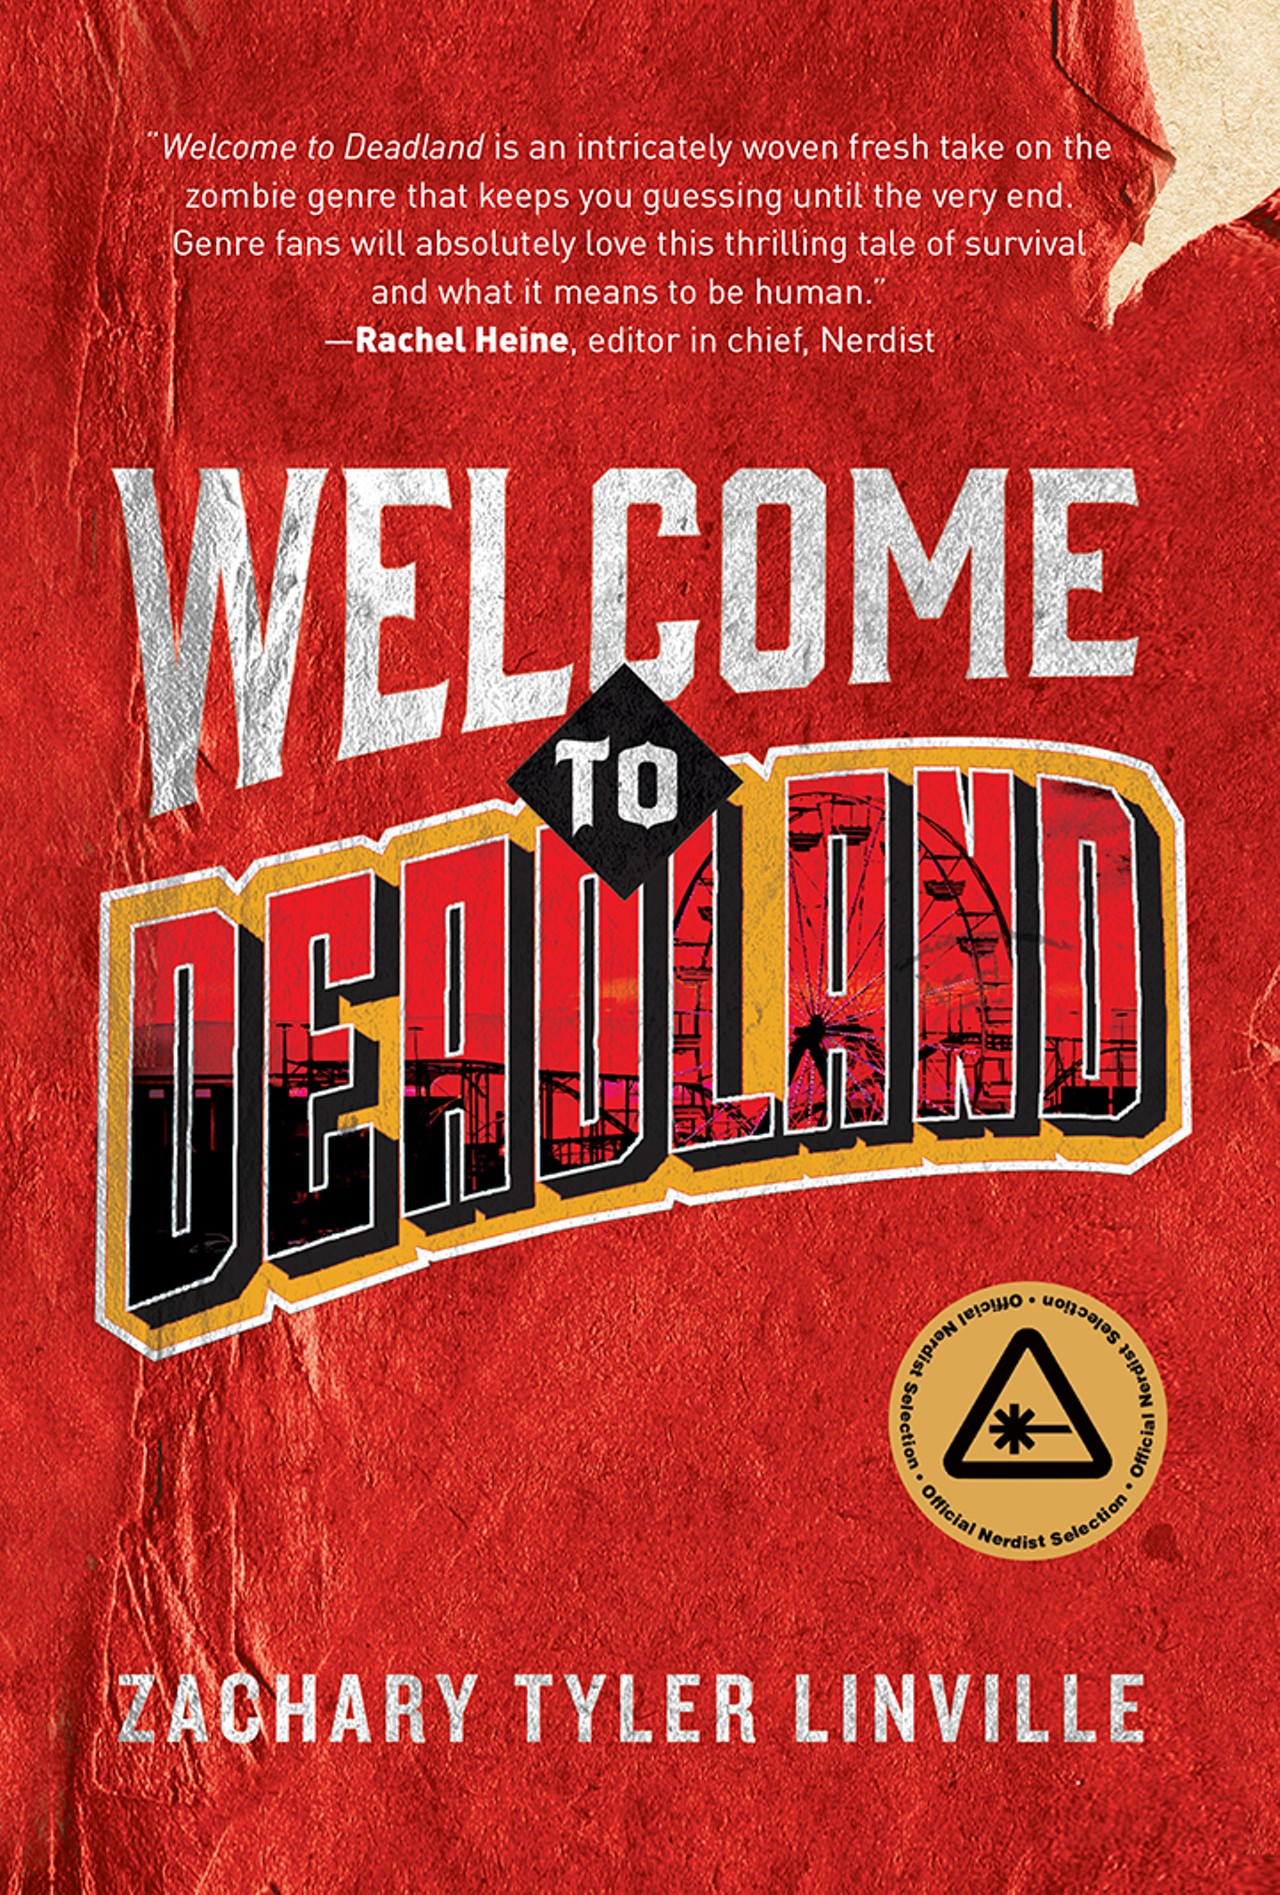 Saturday, Aug. 6Welcome to Deadland Launch at Barnes and Noble, Colonial Plaza